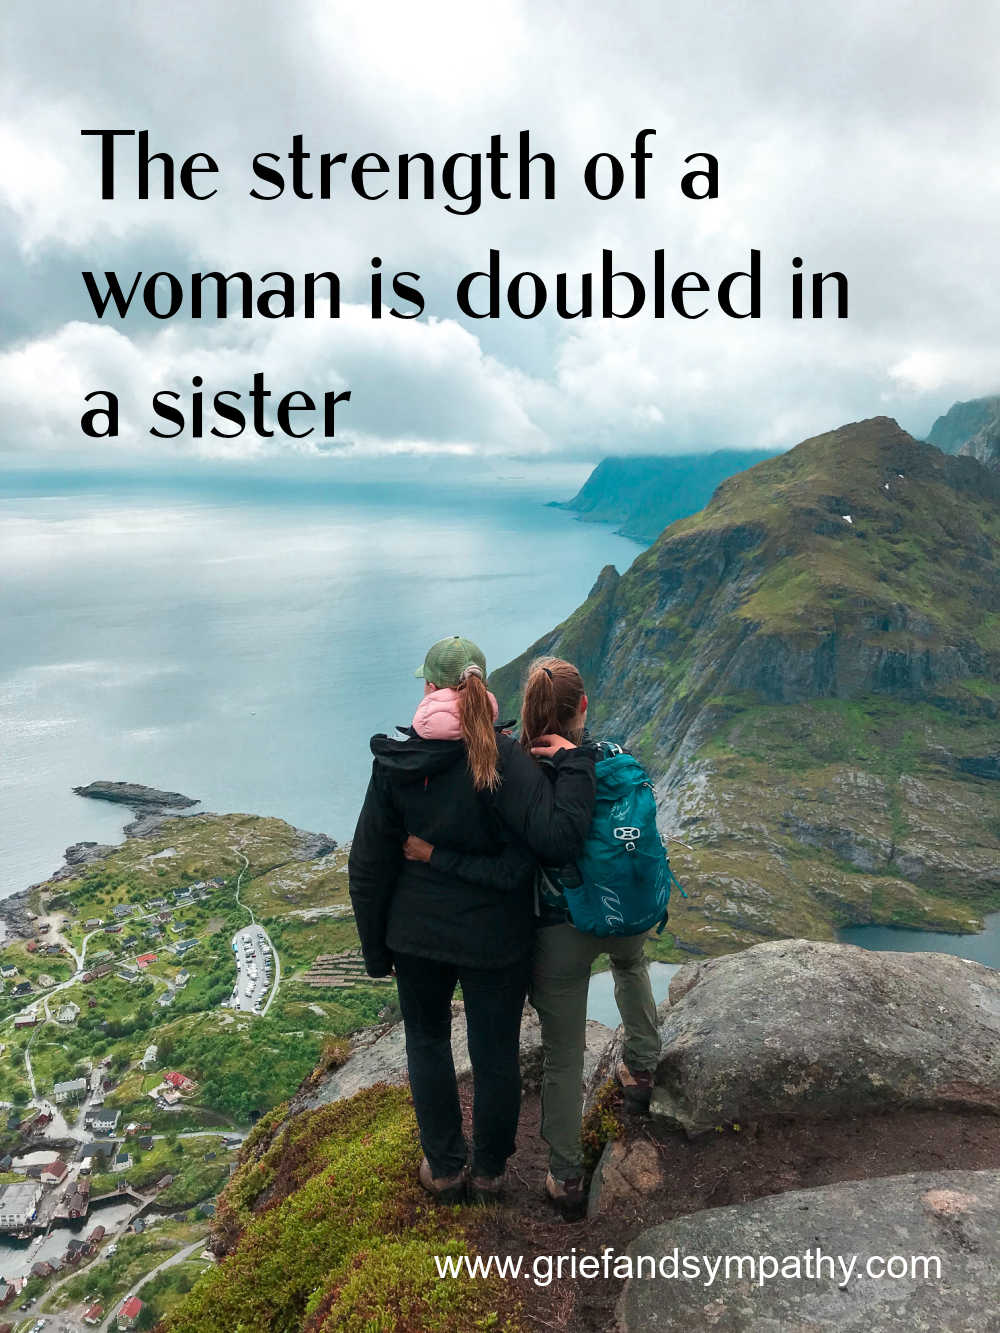 love short poems about sisters